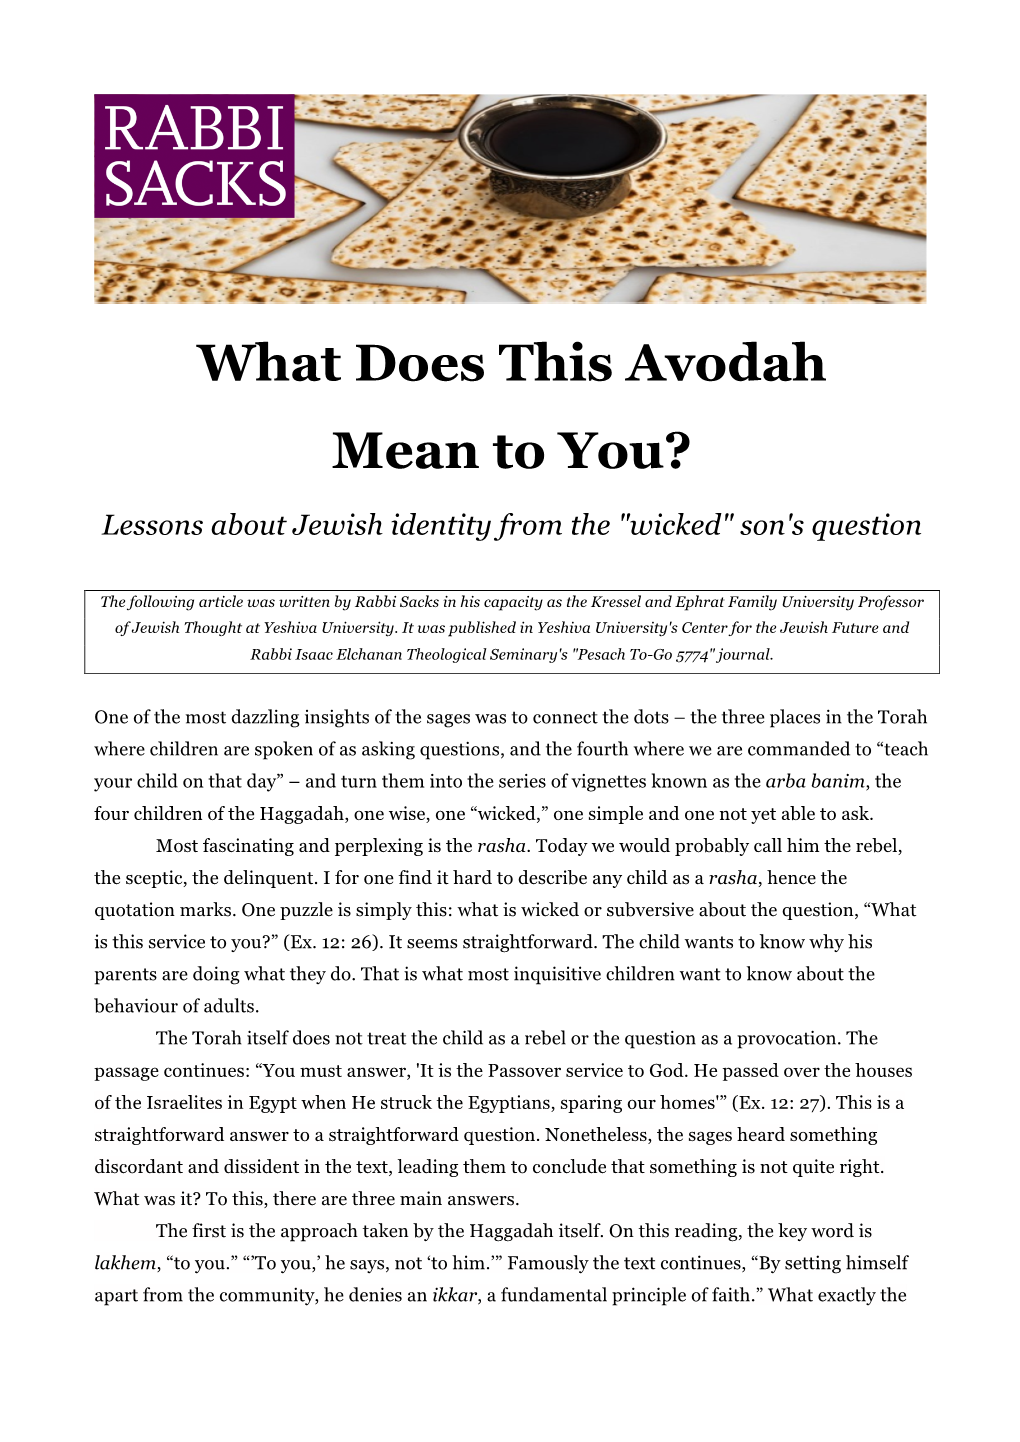 What Does This Avodah Mean to You?